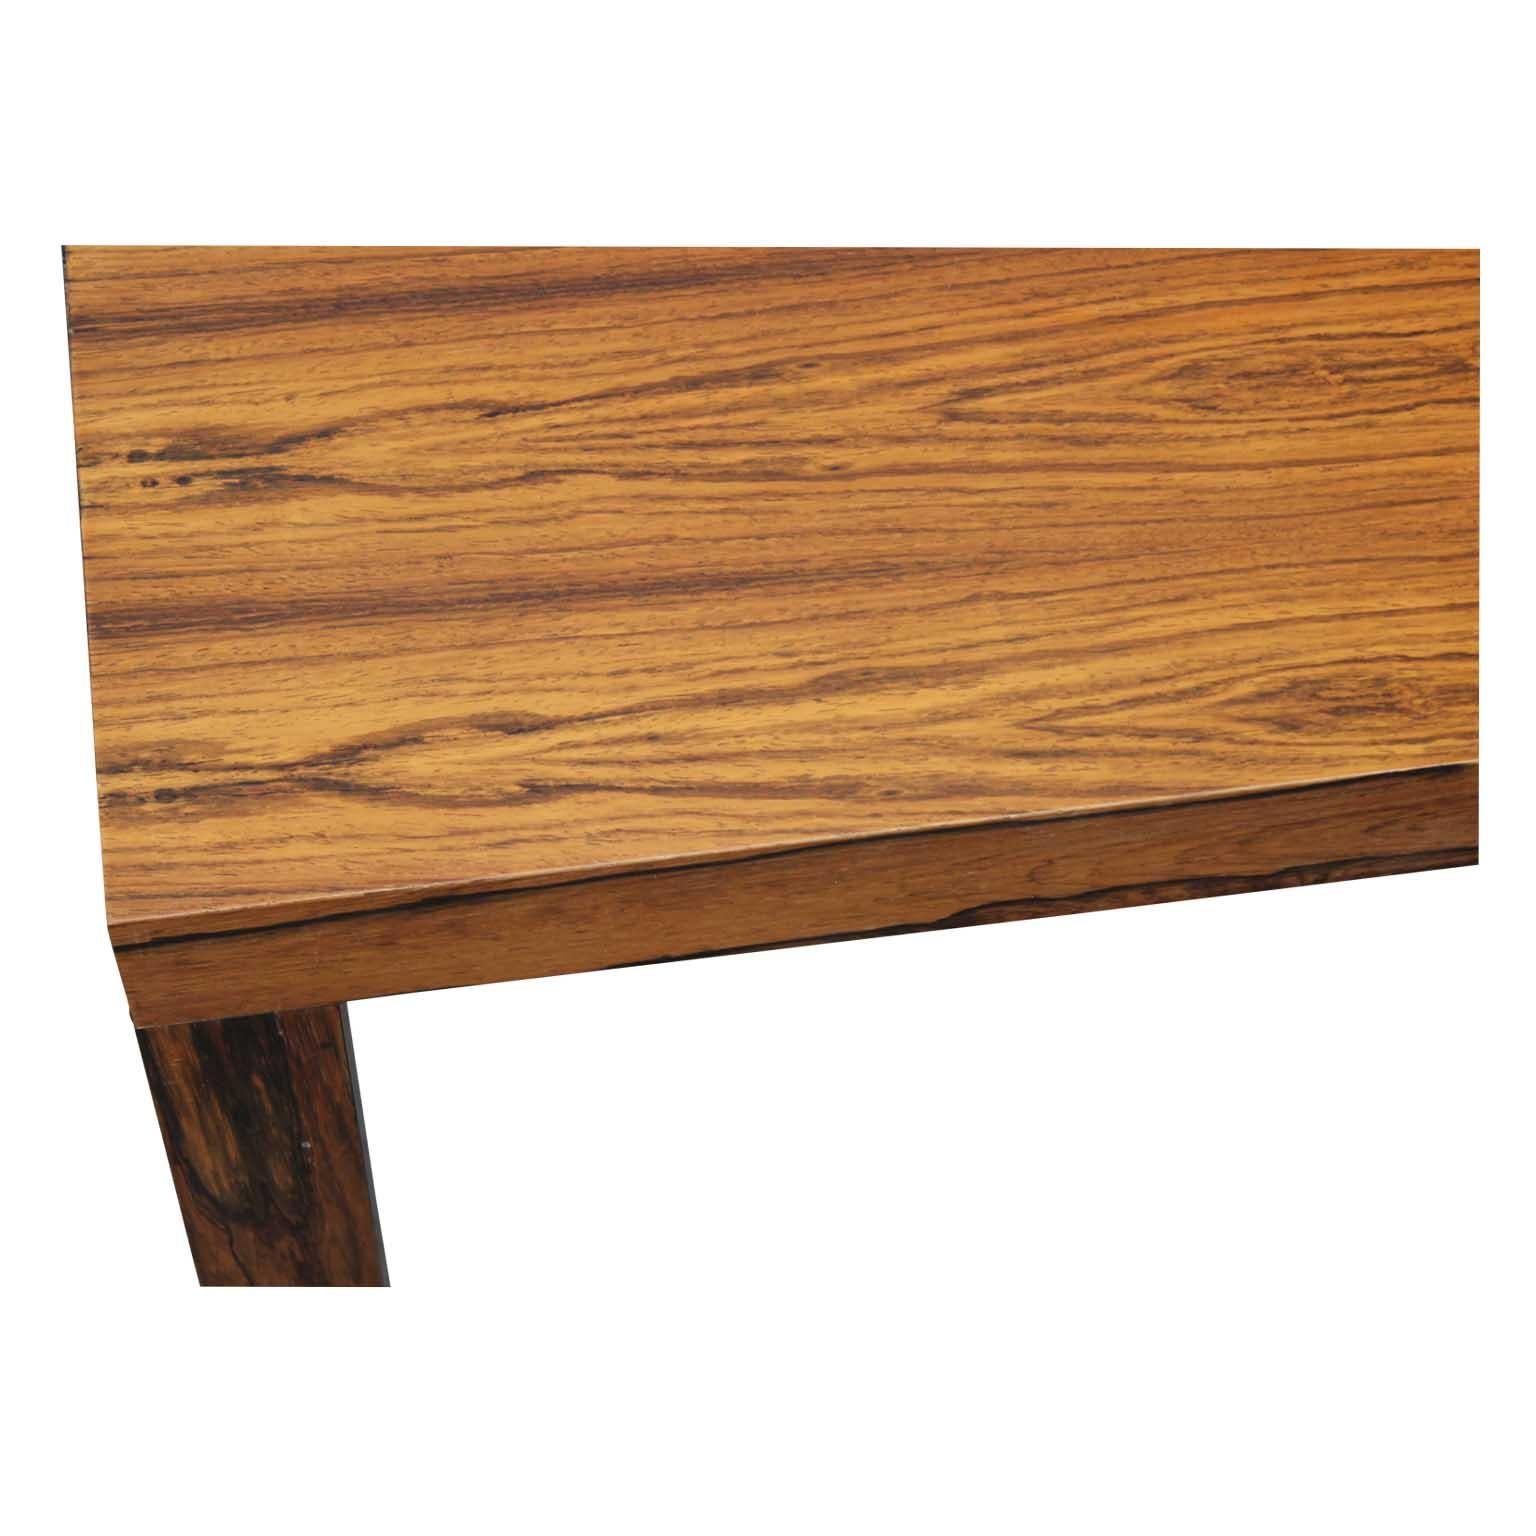 Mid-20th Century Modern Square Danish Rosewood Coffee Table